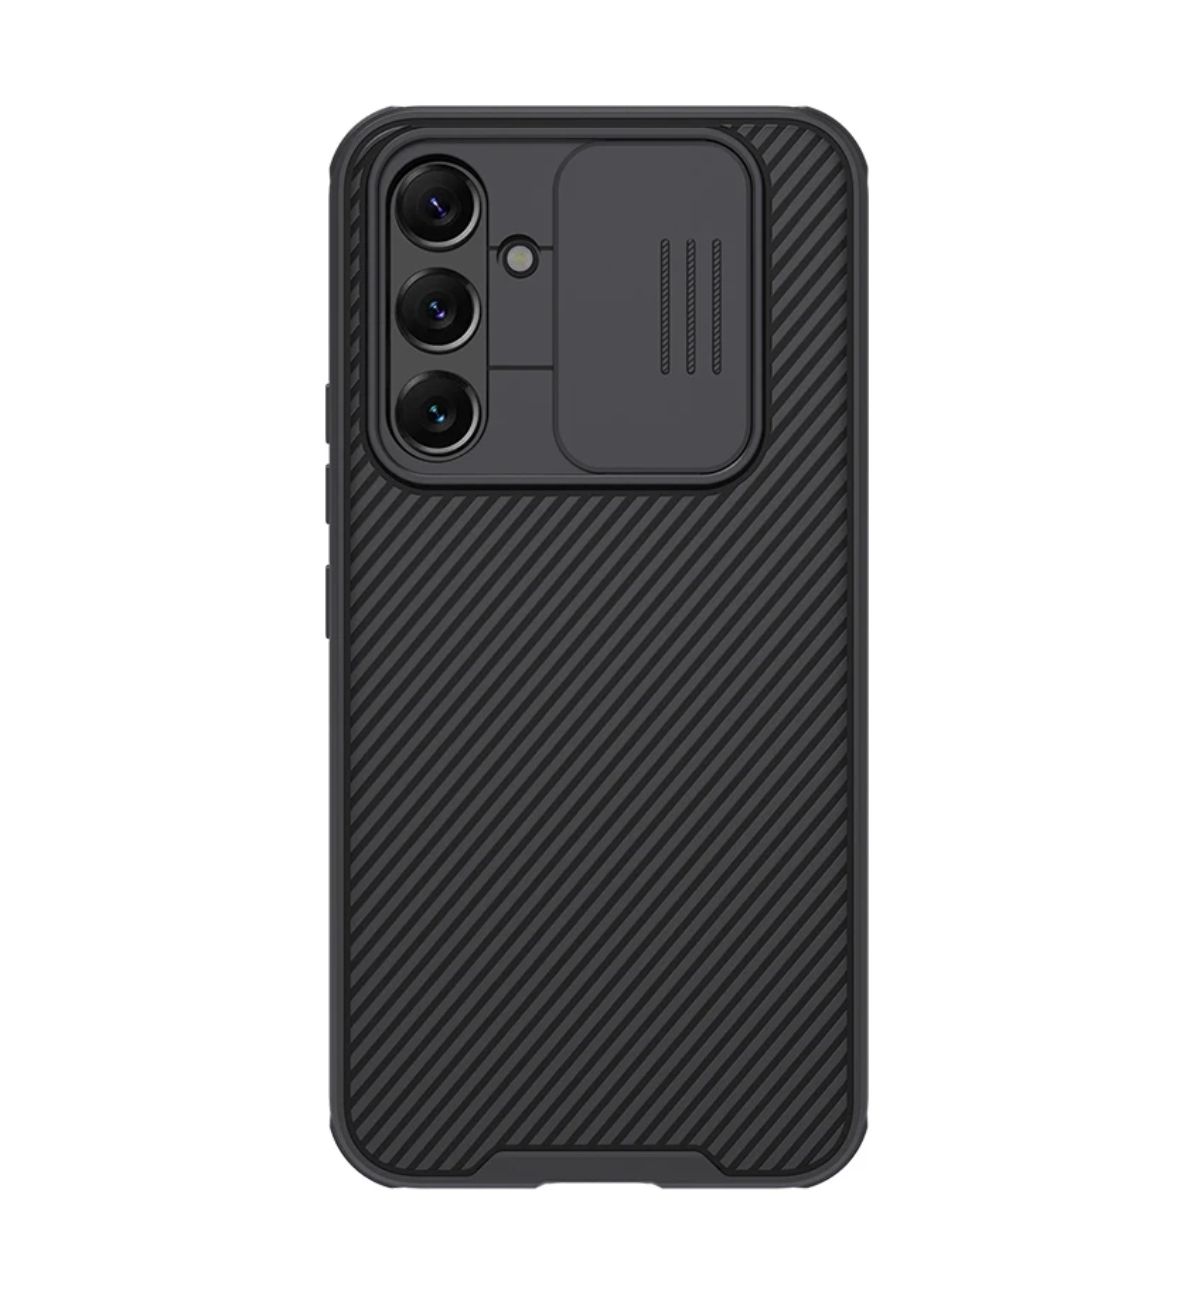 Image of the Nillkin CamShield Pro Case for Samsung Galaxy A54 5G in a sleek color, showcasing the slim design and comfortable grip. Text overlay: "Nillkin CamShield Pro Case (UK): Stylish protection for your Samsung Galaxy A54 5G. Slide cover safeguards camera & offers privacy.